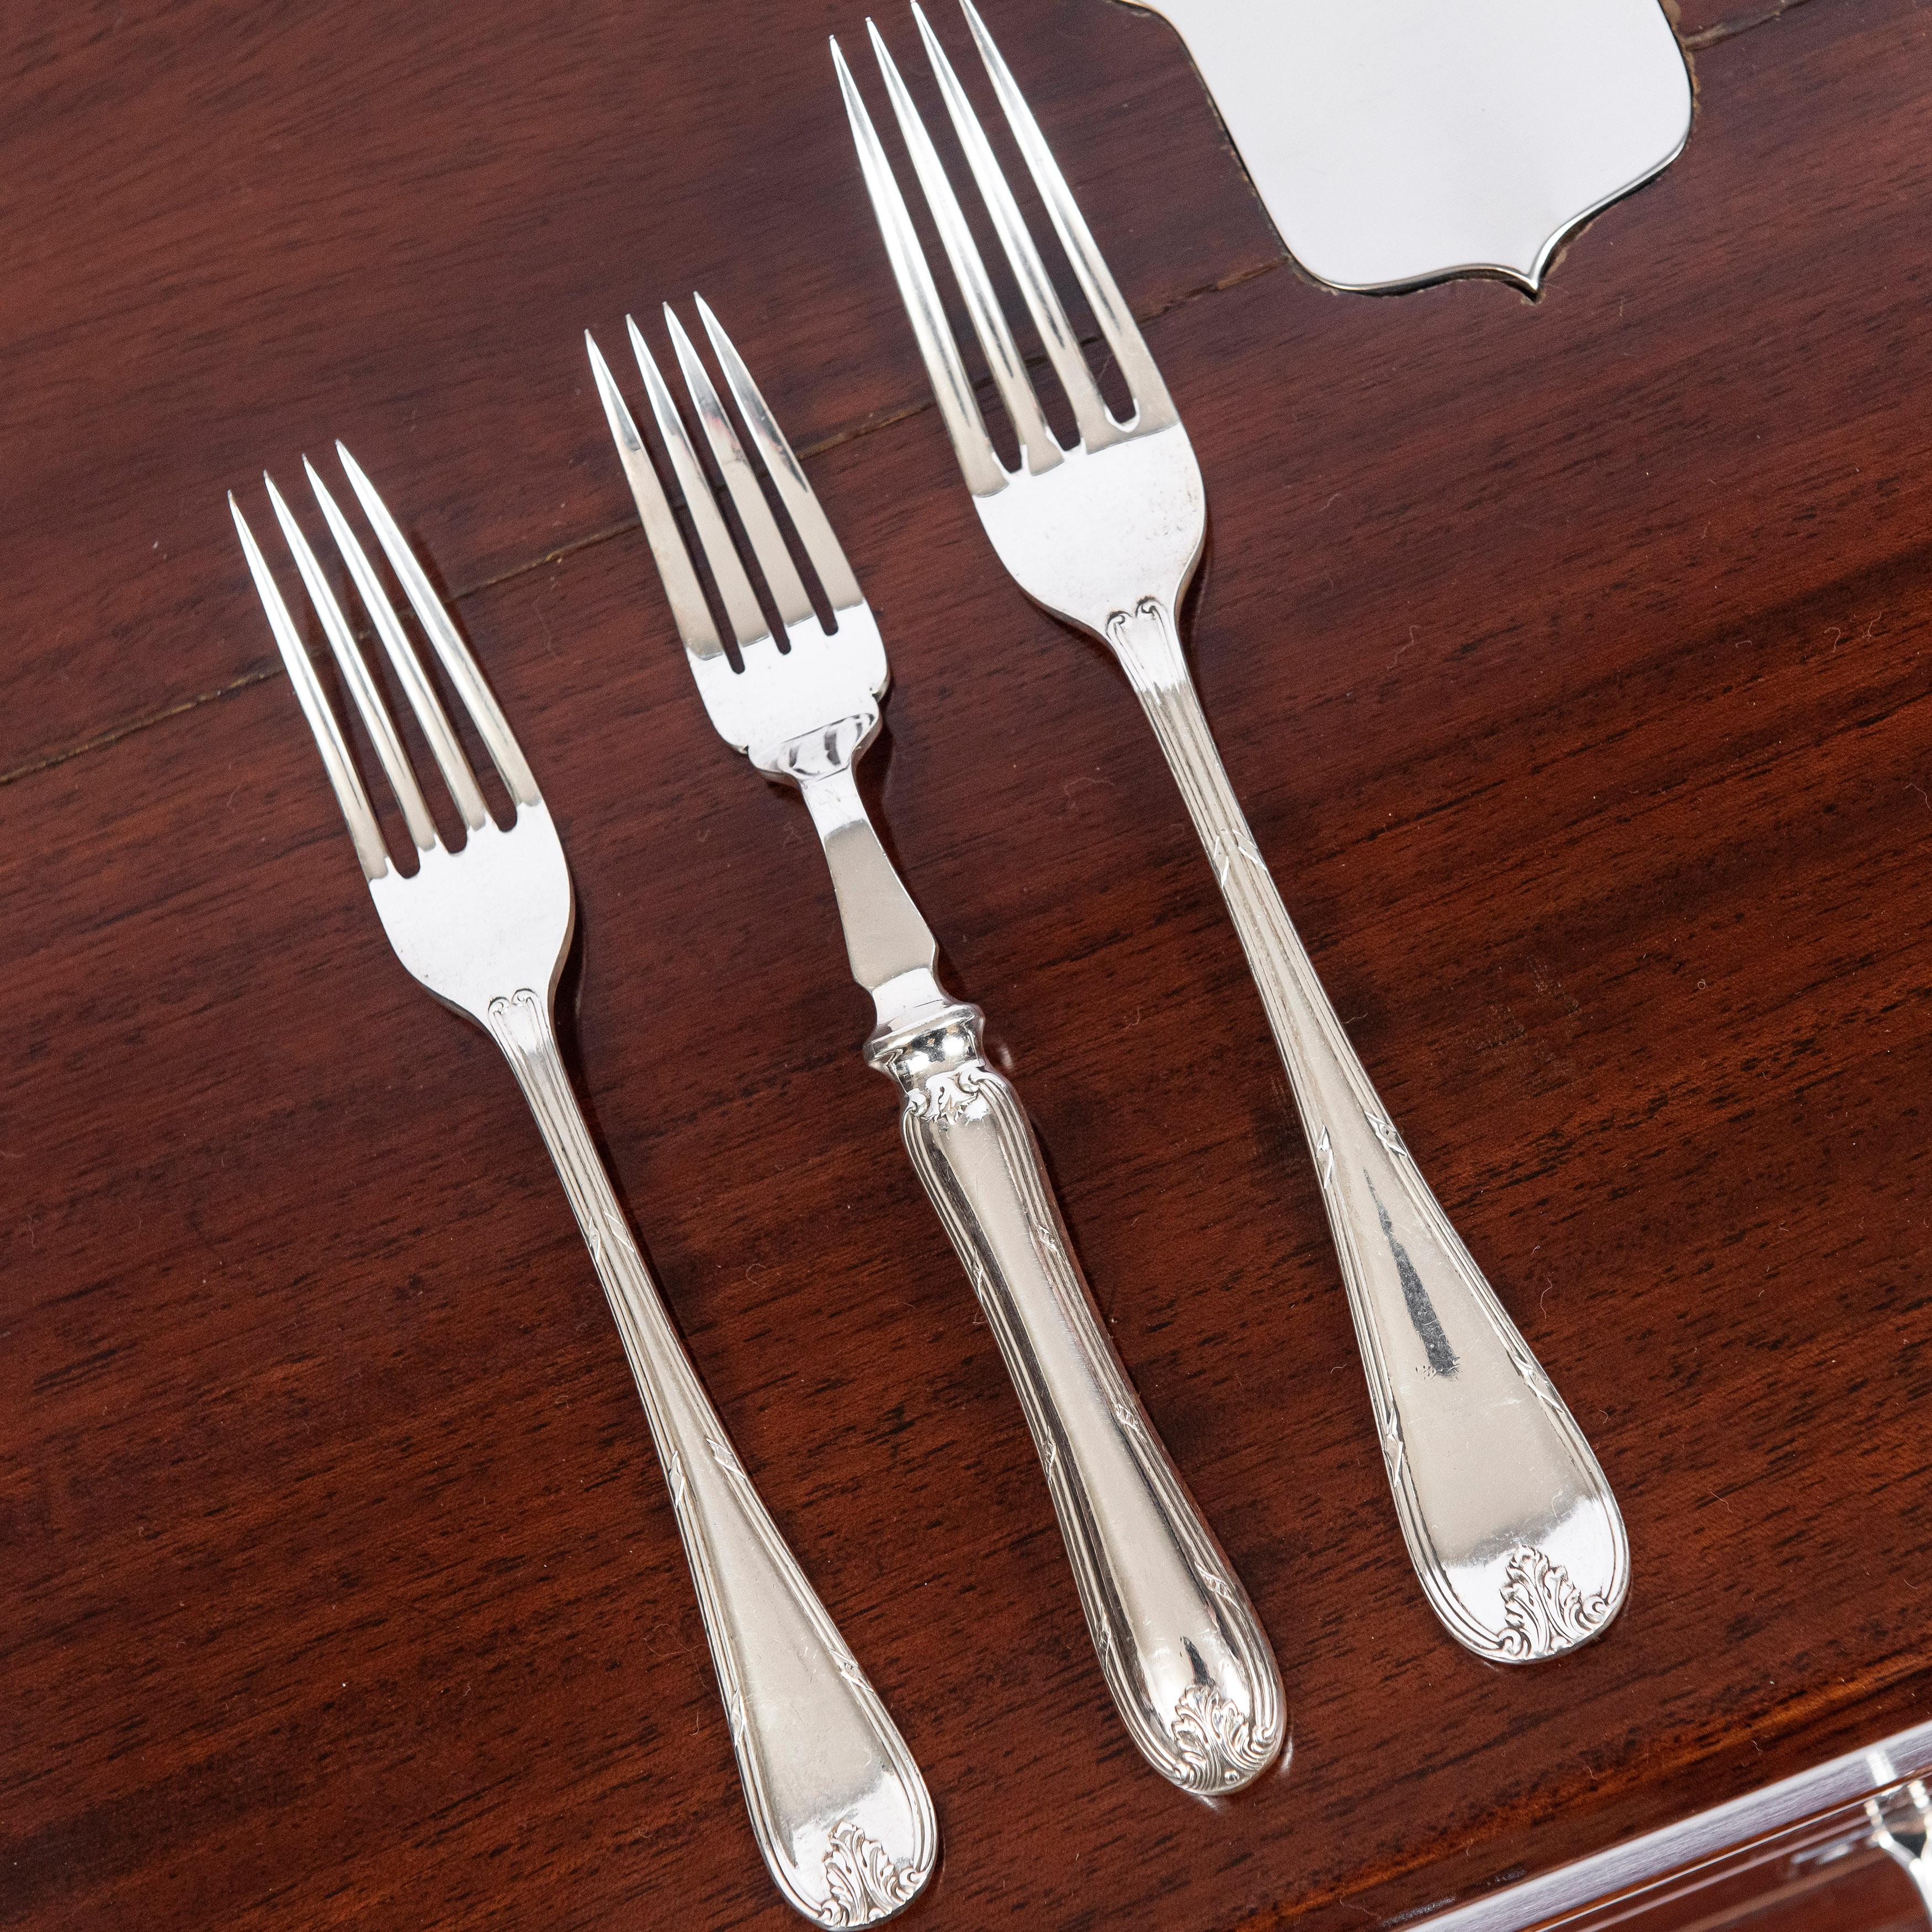 Mappin & Webb Cutlery Set for 12 People. England, Early 20th Century For Sale 4